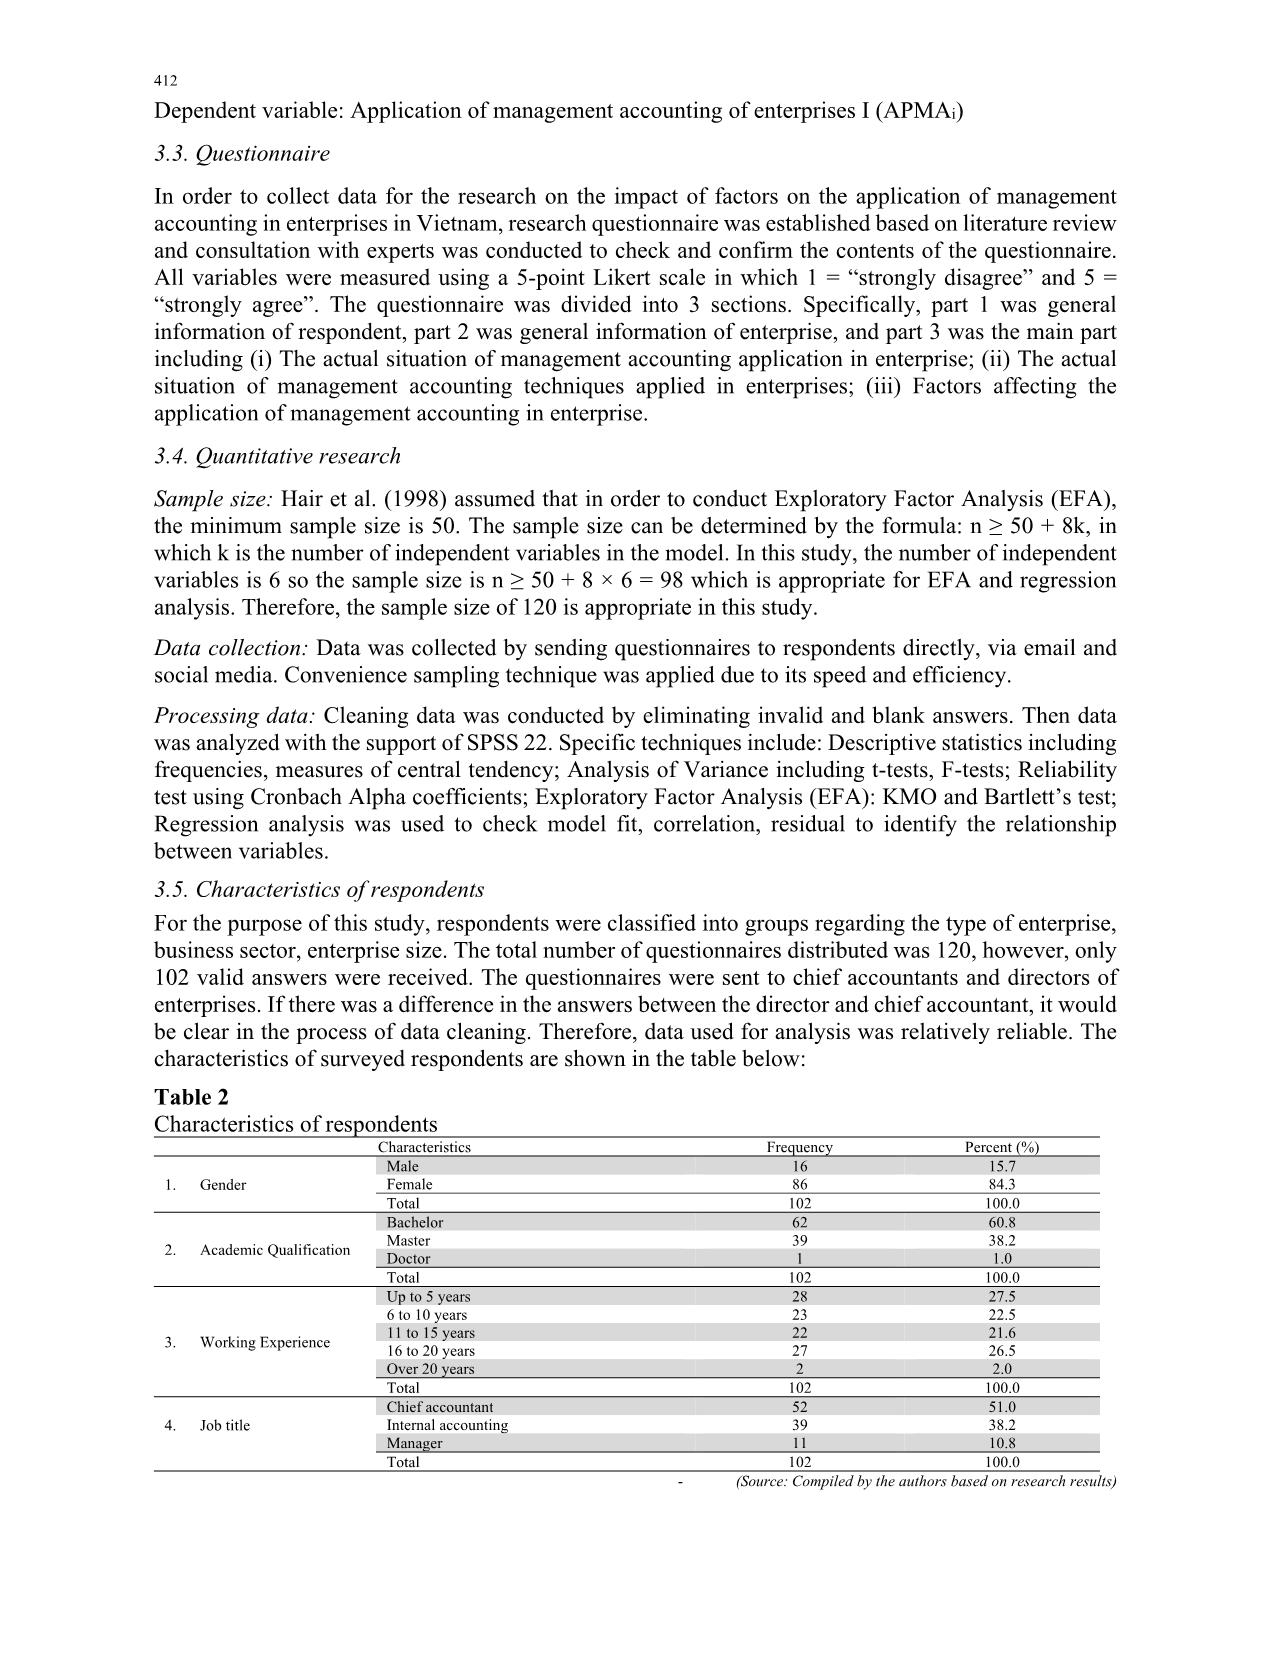 Factors affecting the application of management accounting in Vietnamese enterprises trang 10